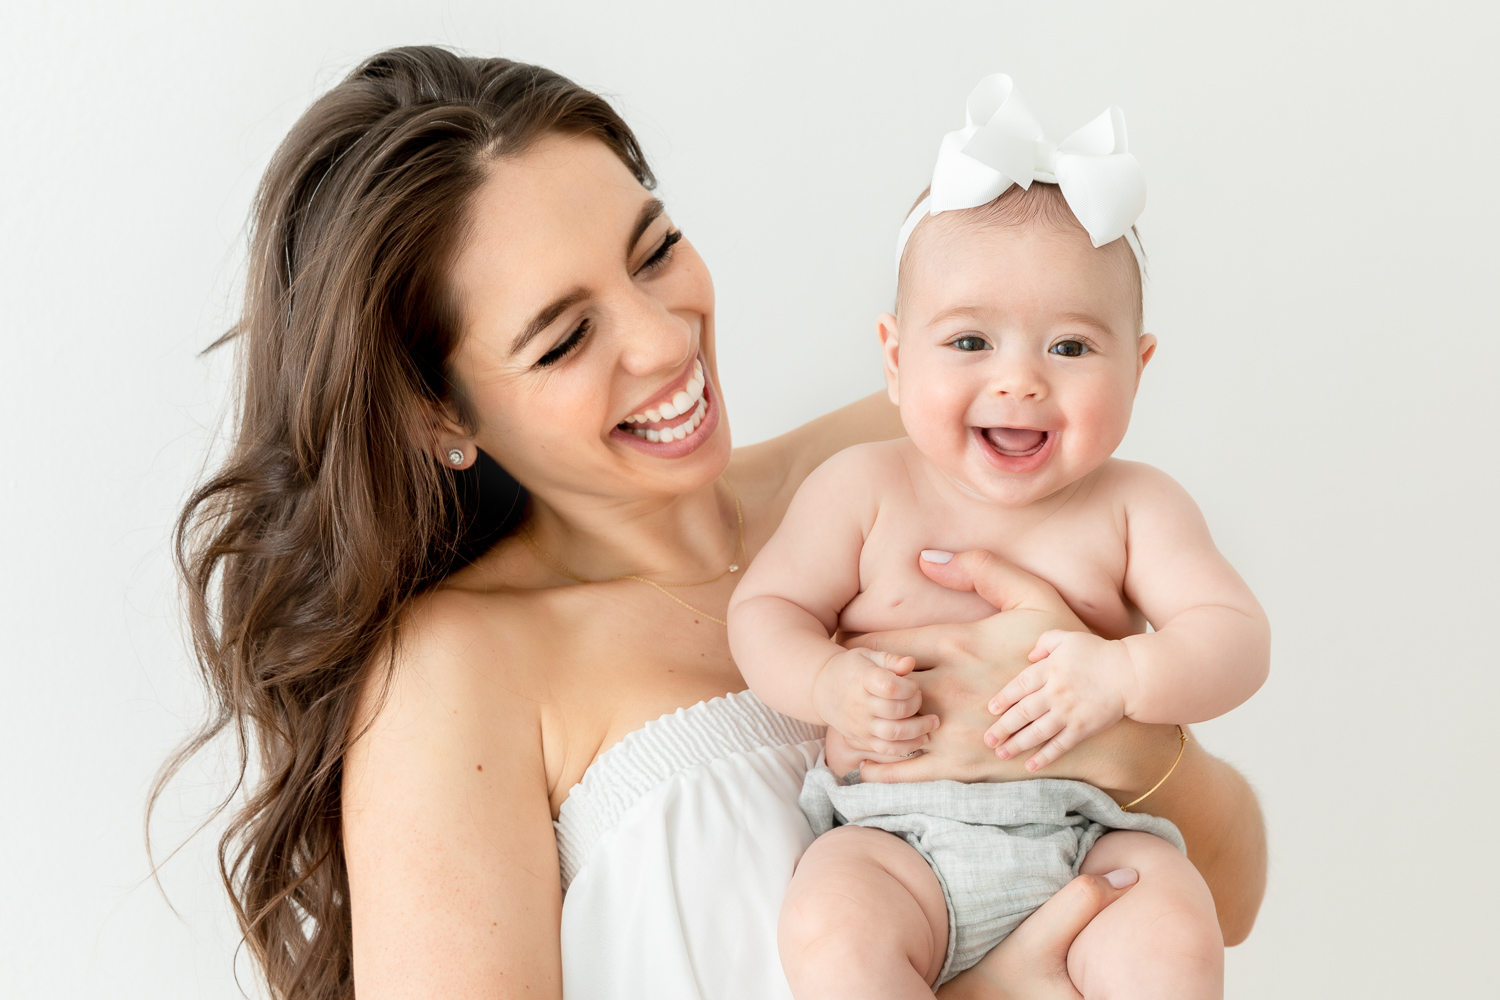 Smiling NJ mother and baby portrait in Essex County